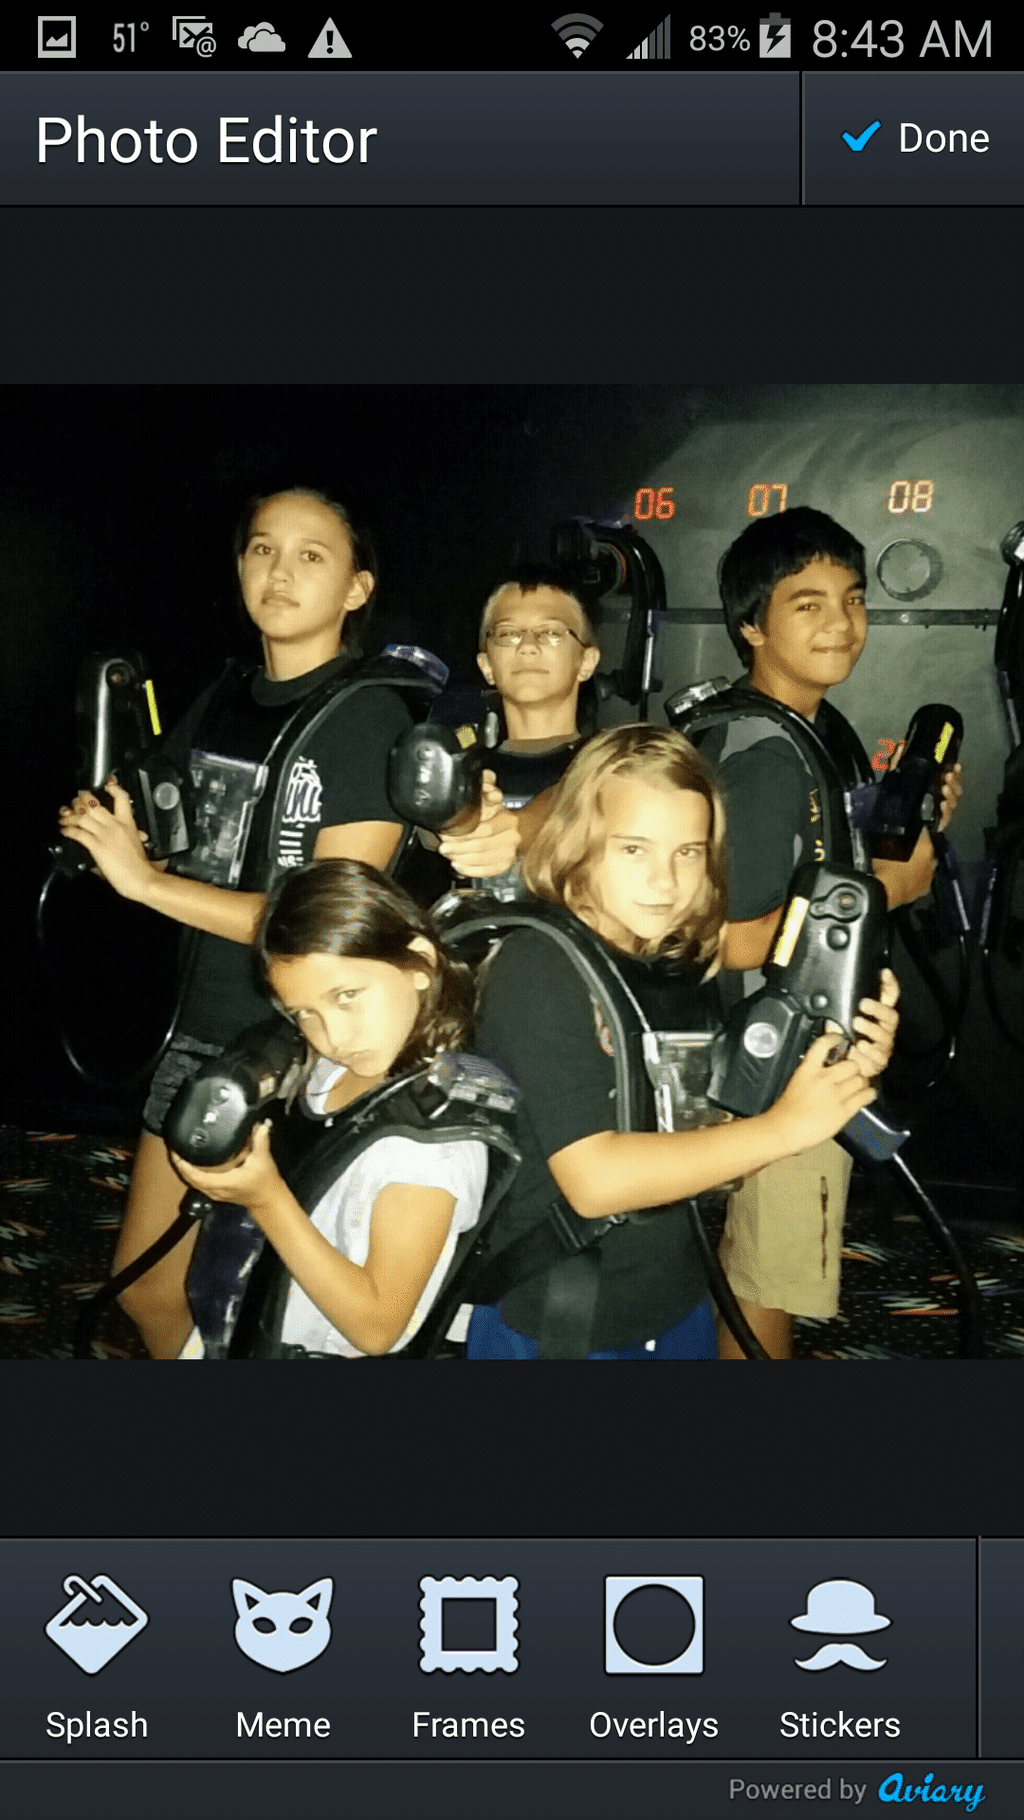 Home screen of kids playing laser tag